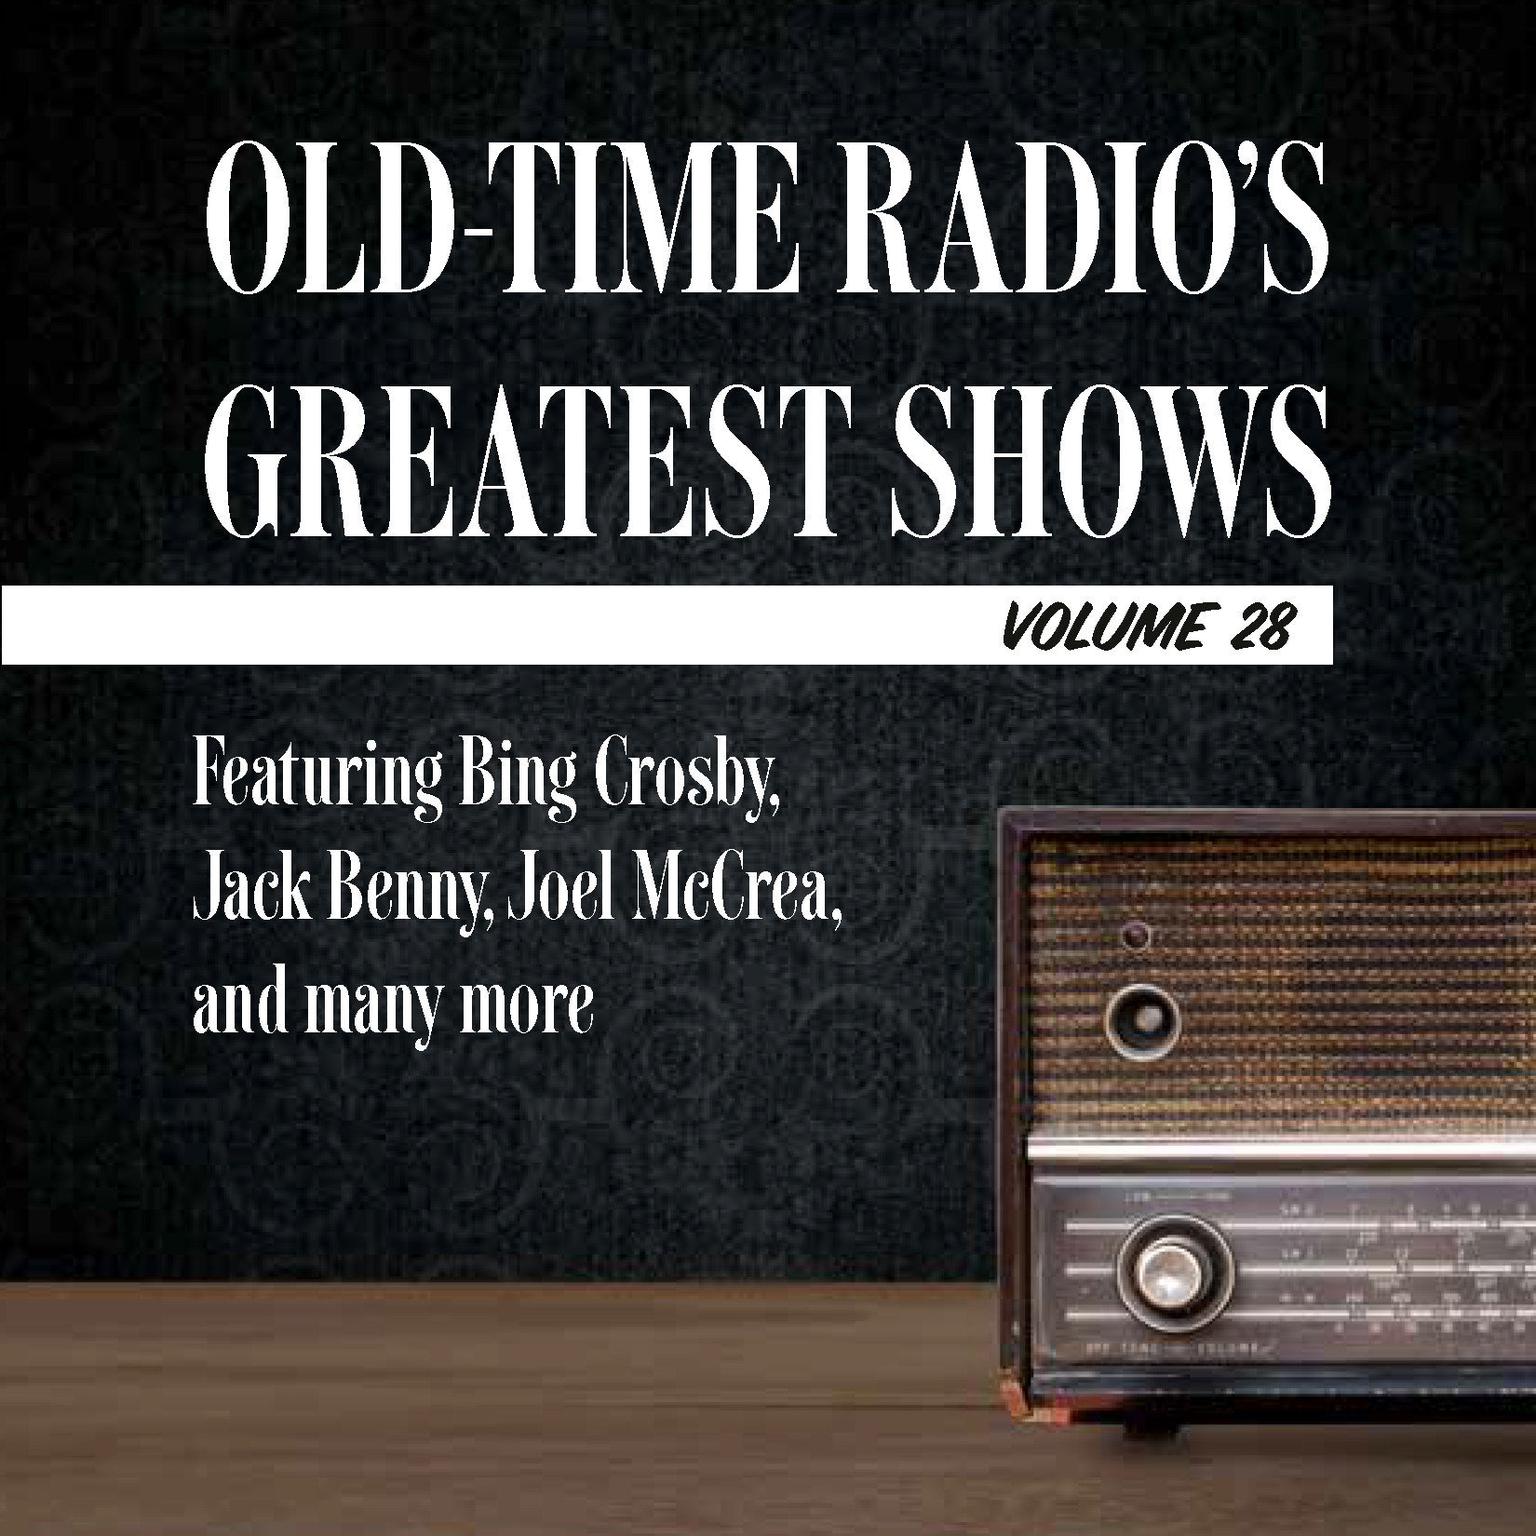 Old-Time Radios Greatest Shows, Volume 28: Featuring Bing Crosby, Jack Benny, Joel McCrea, and many more Audiobook, by Carl Amari